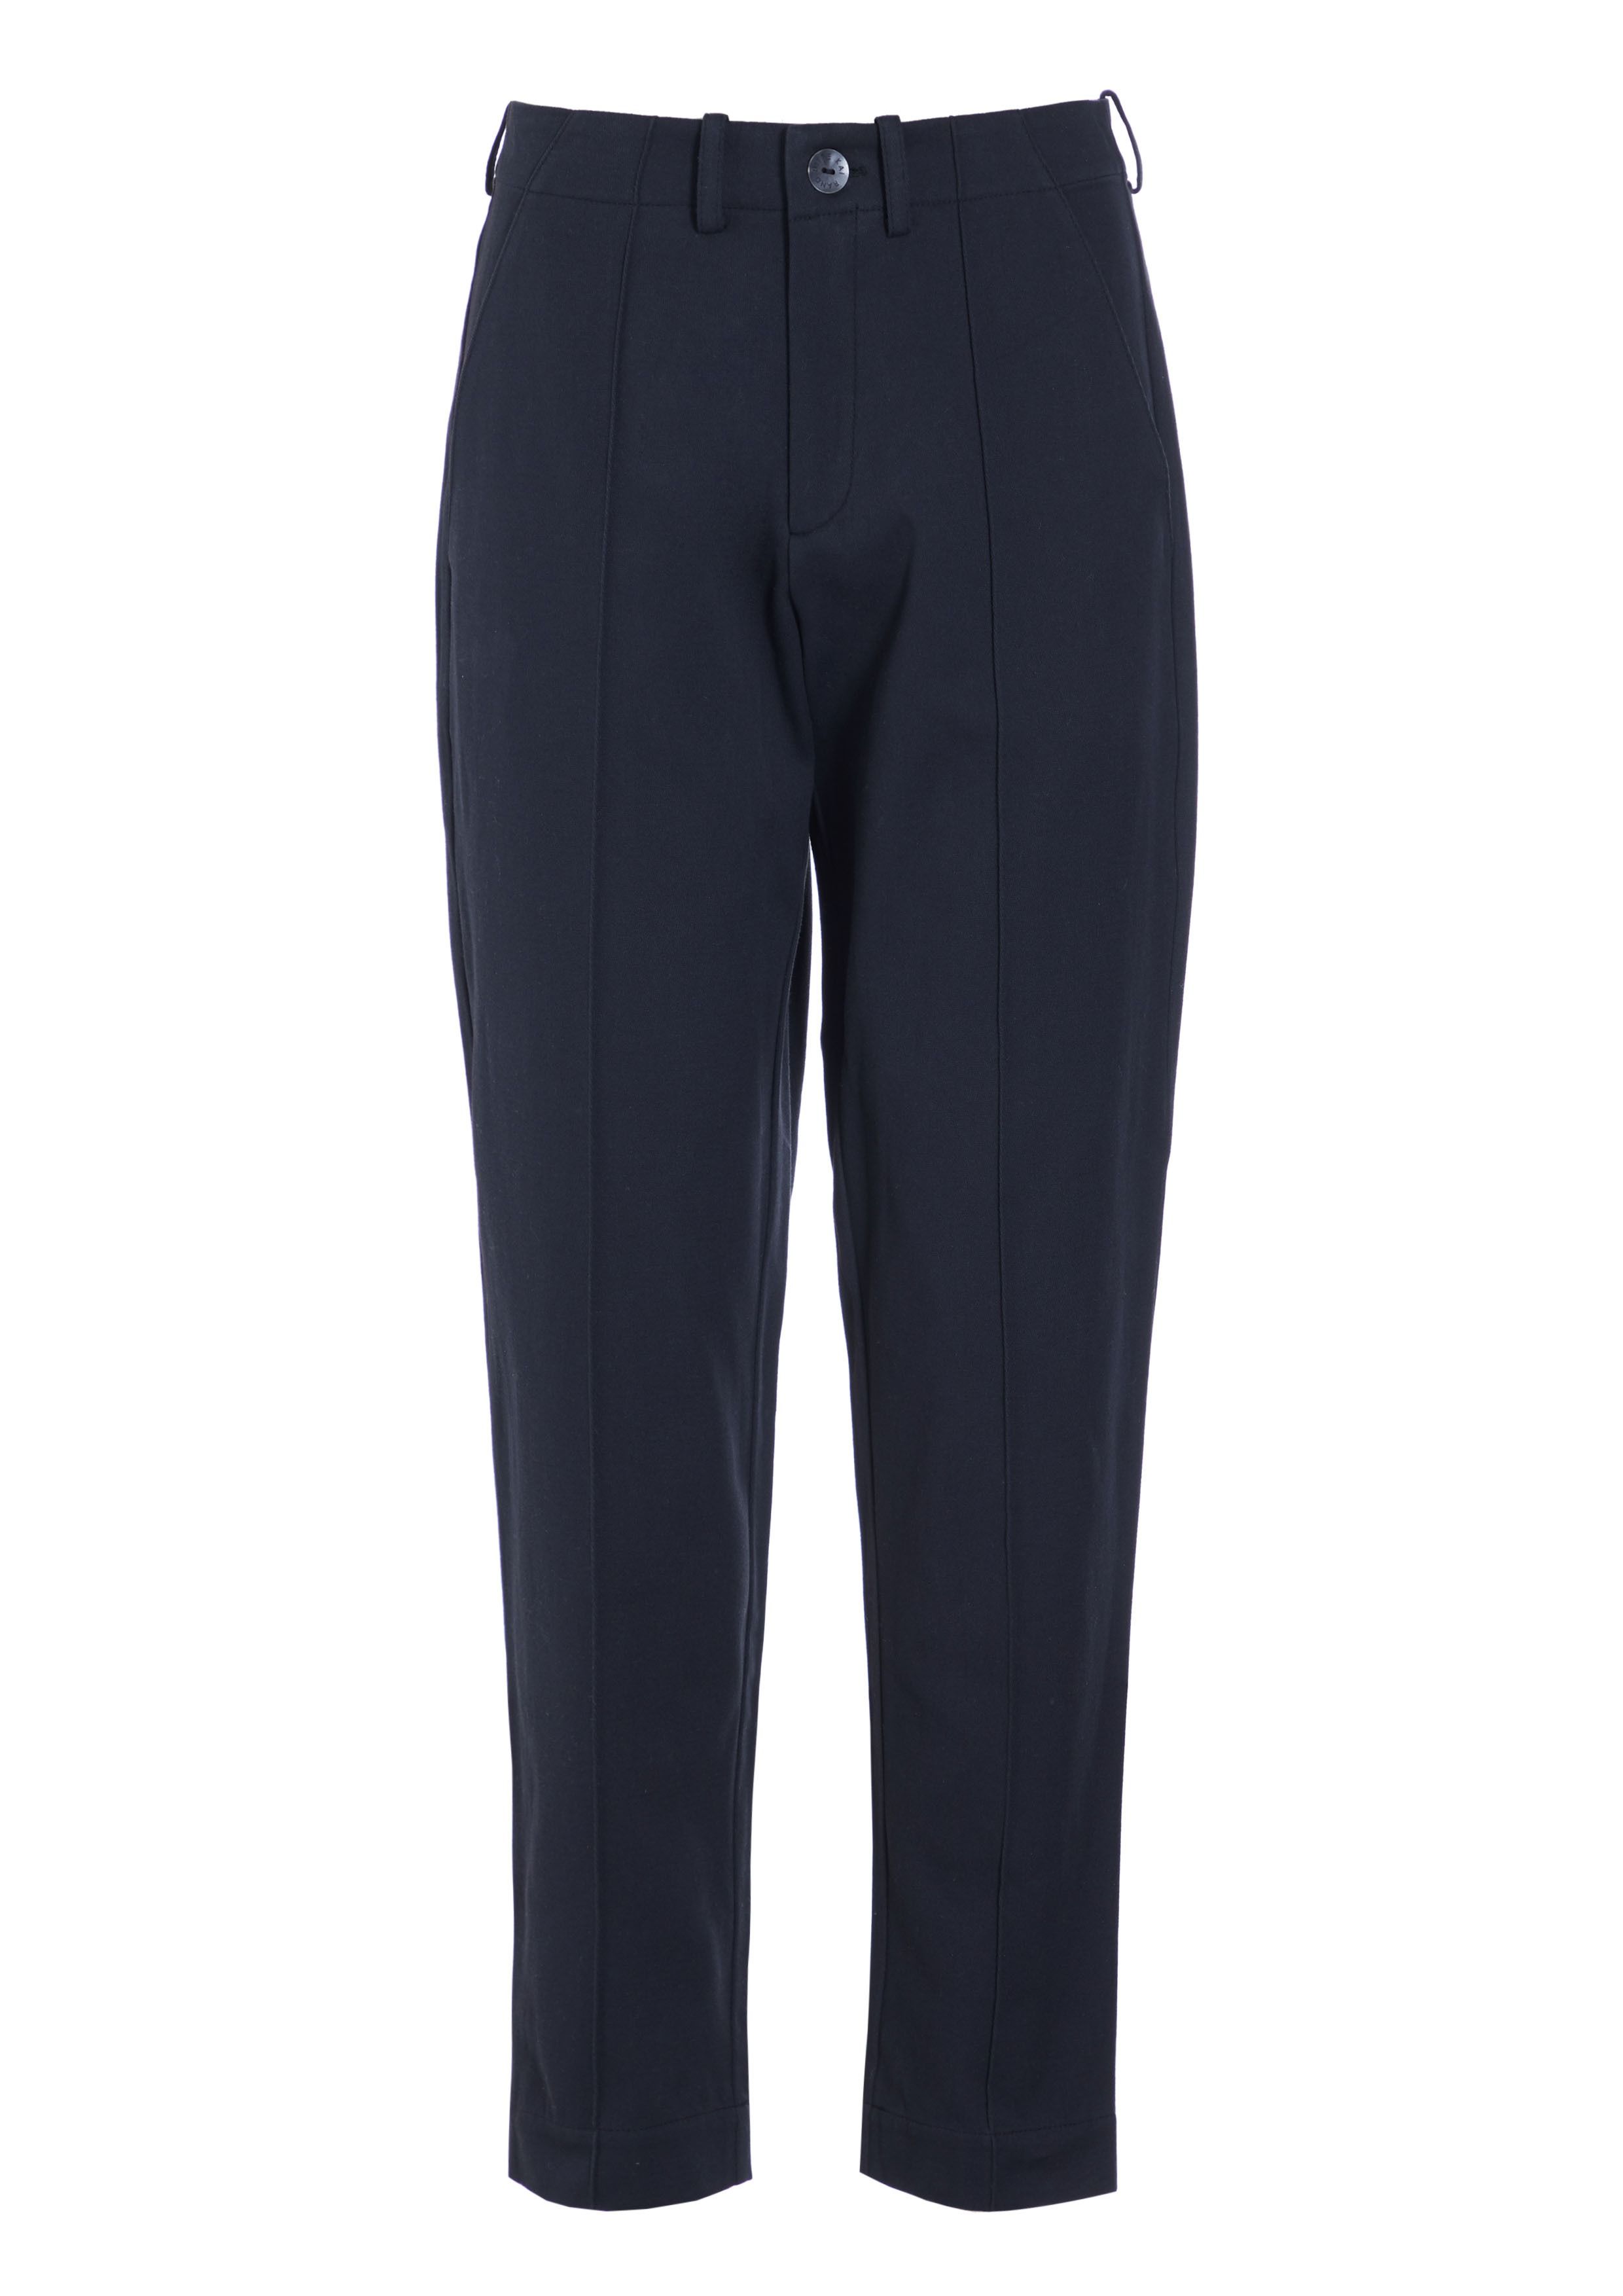 GARCON TWILL TROUSERS WITH PLEATS